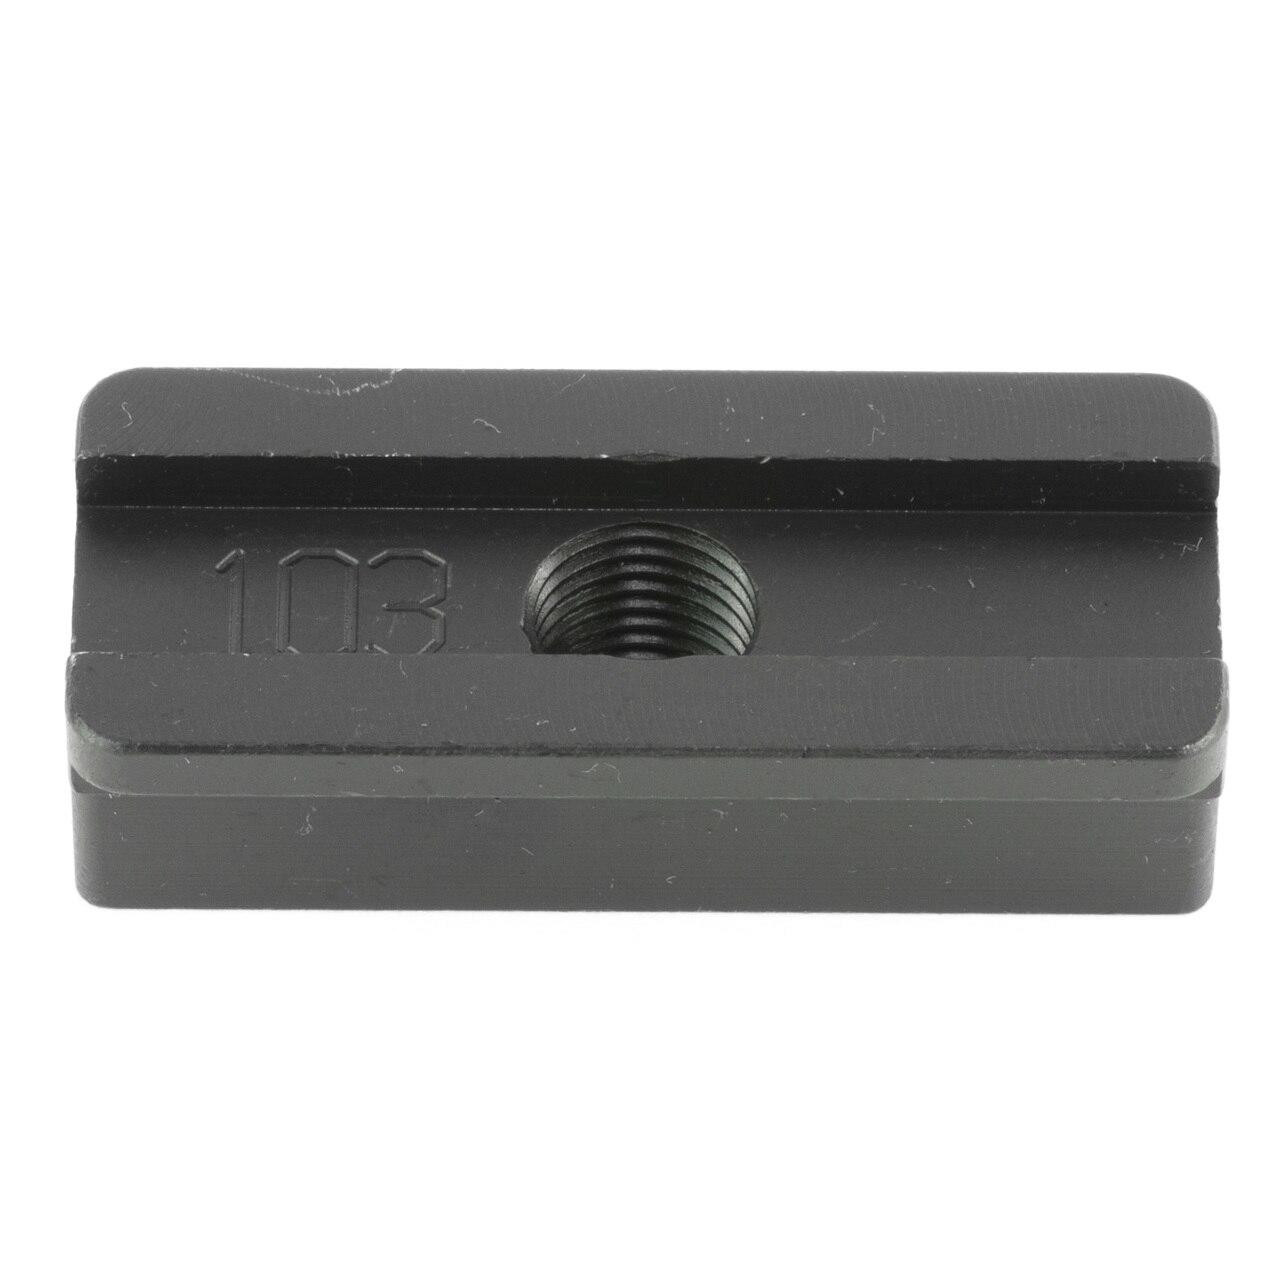 MGW Armory Mgw Shoe Plate For Springfield Xd-s